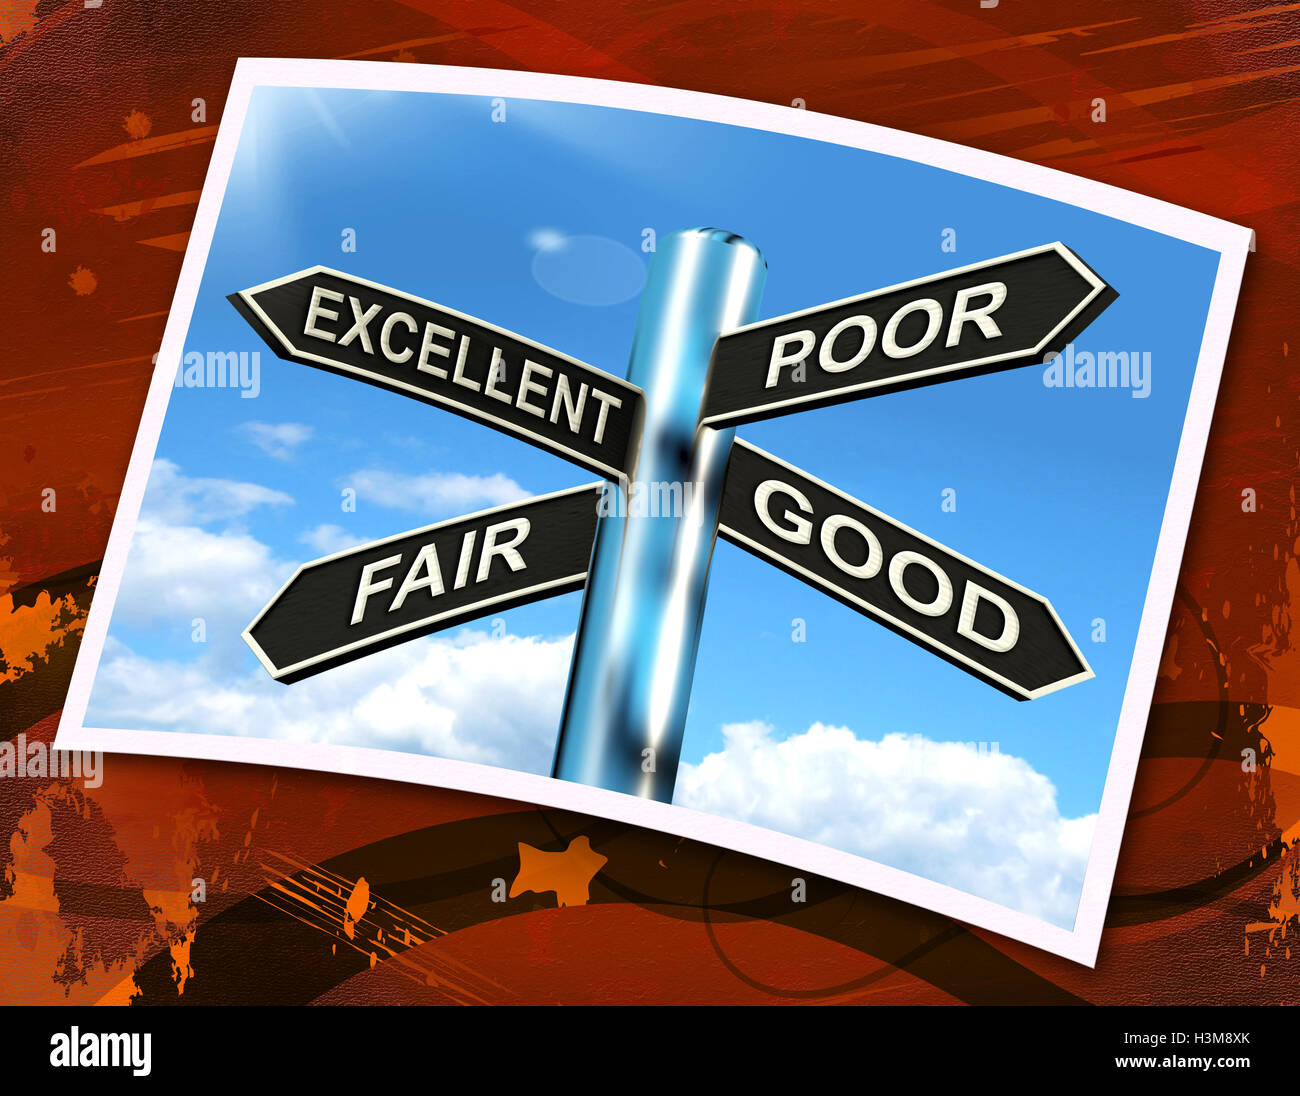 Excellent Poor Fair Good Sign Means Performance Review Stock Photo